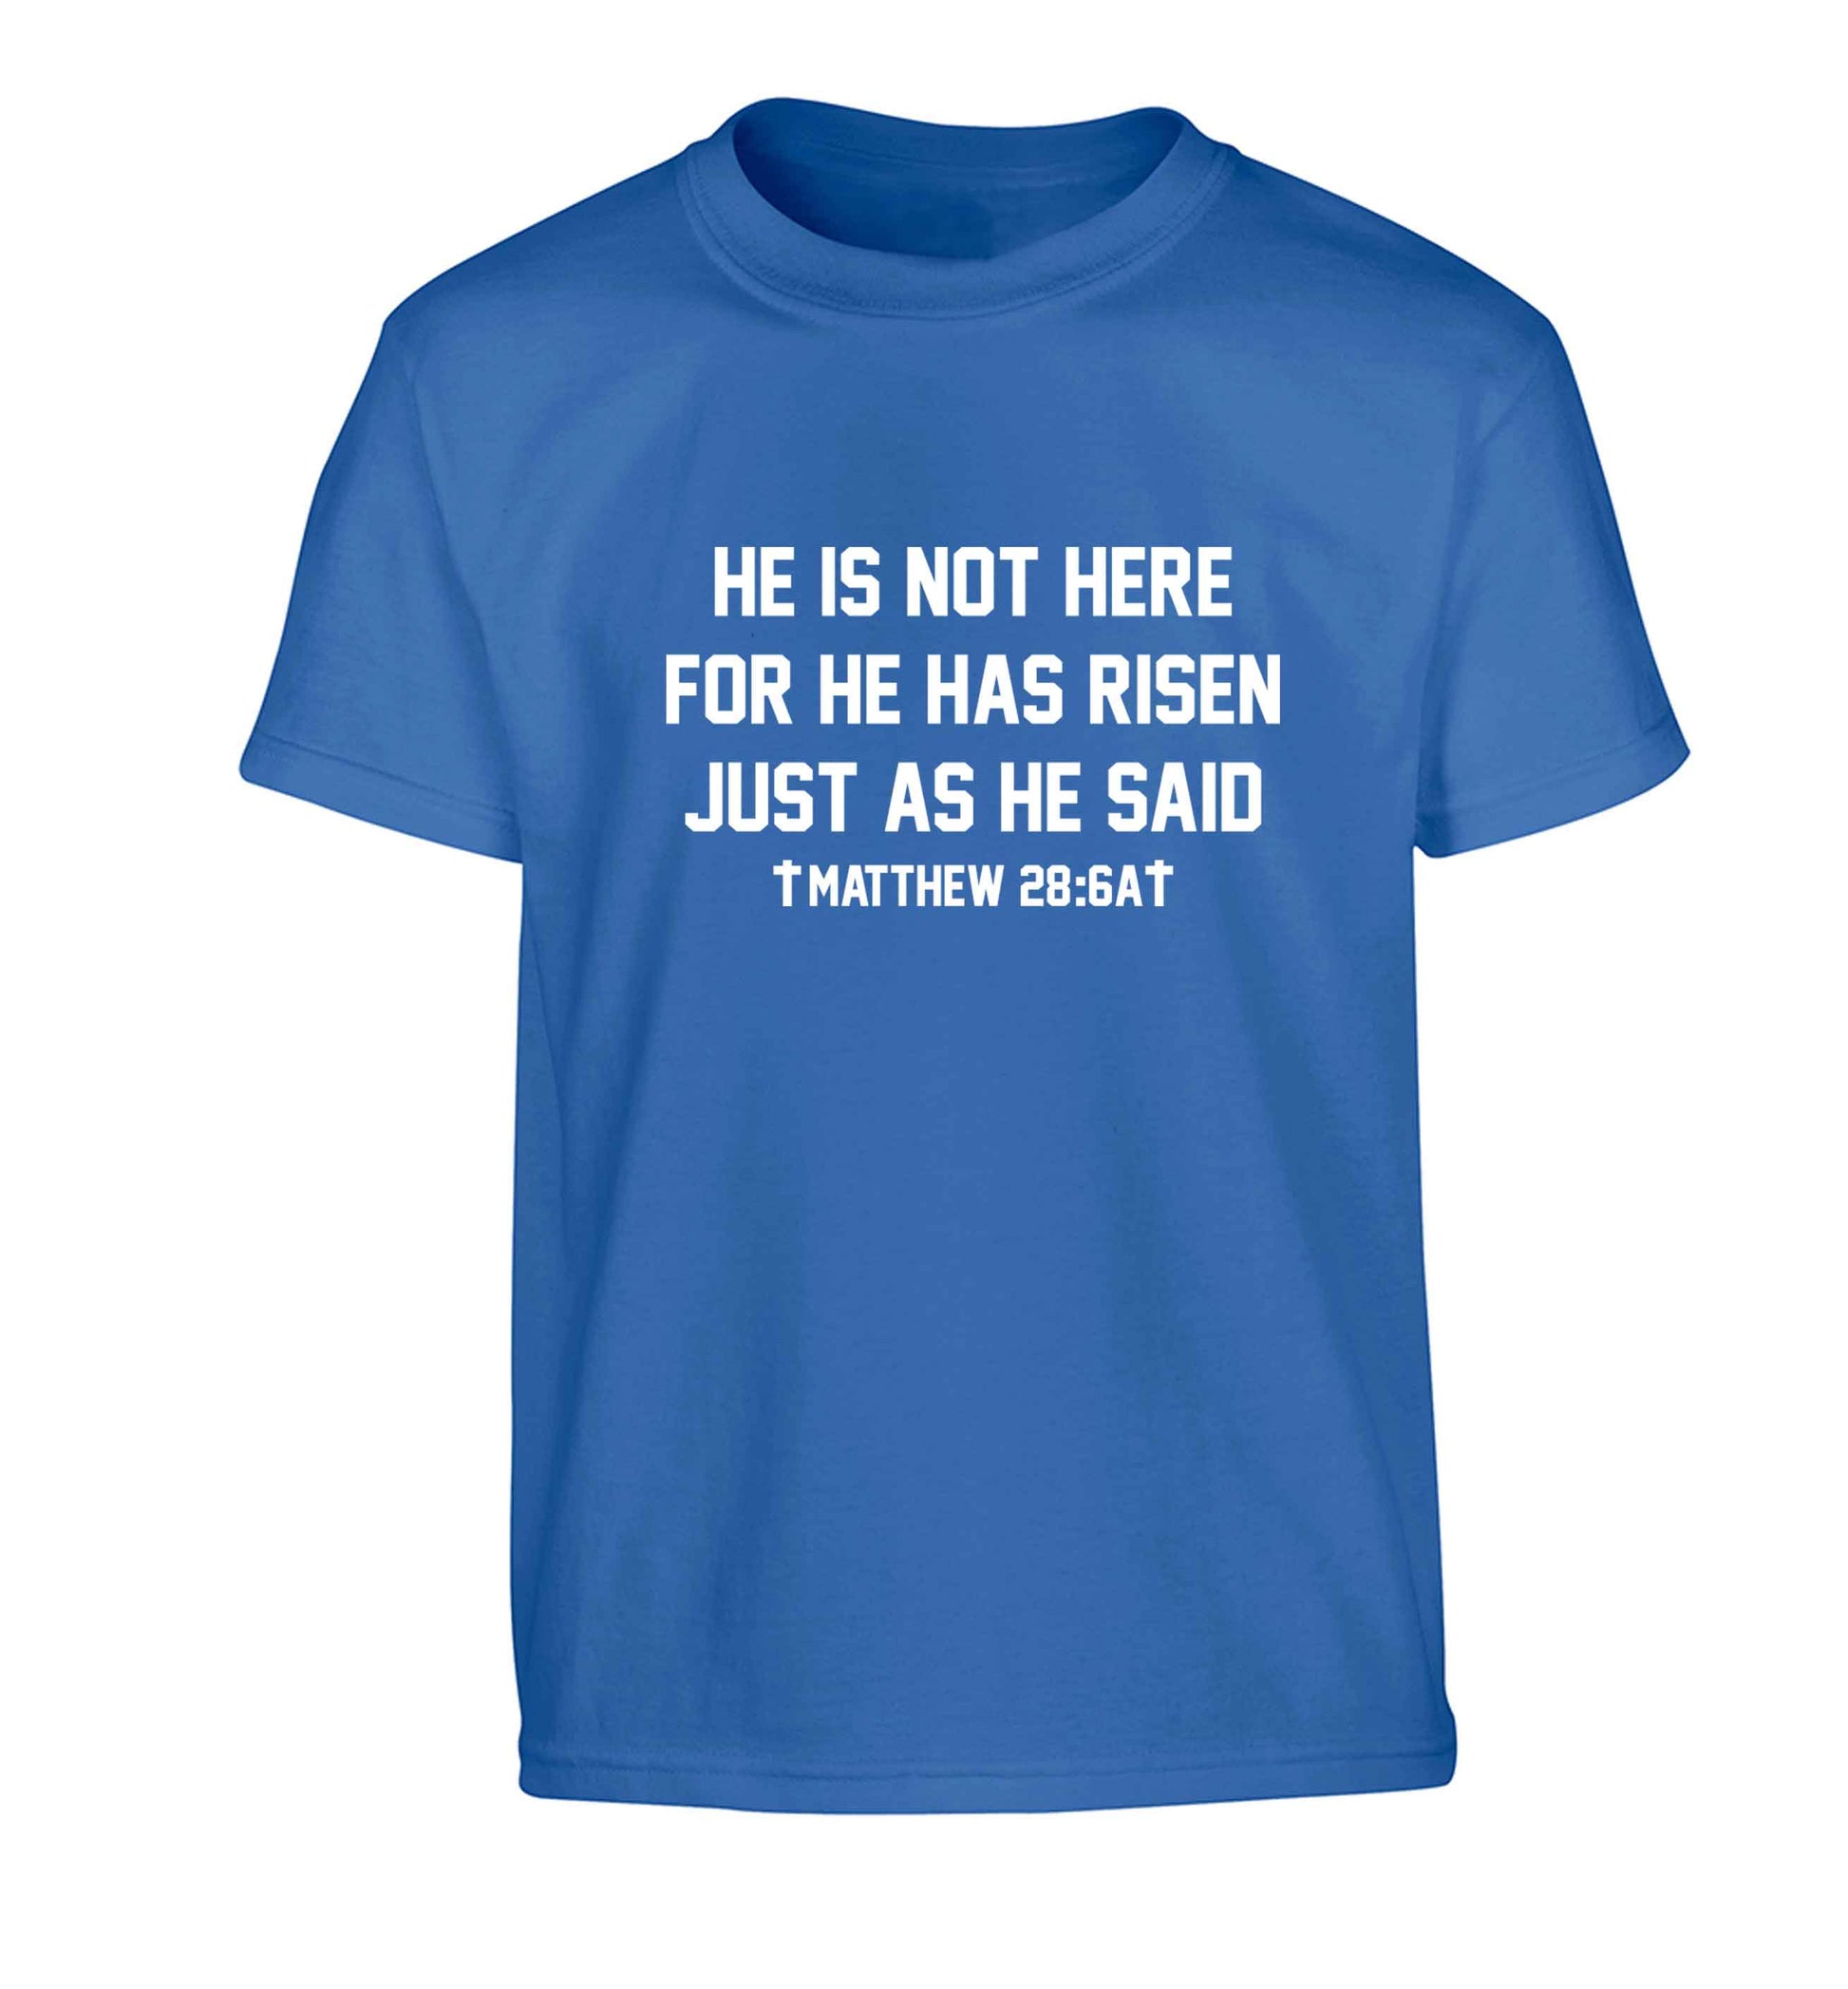 He is not here for he has risen just as he said matthew 28:6A Children's blue Tshirt 12-13 Years